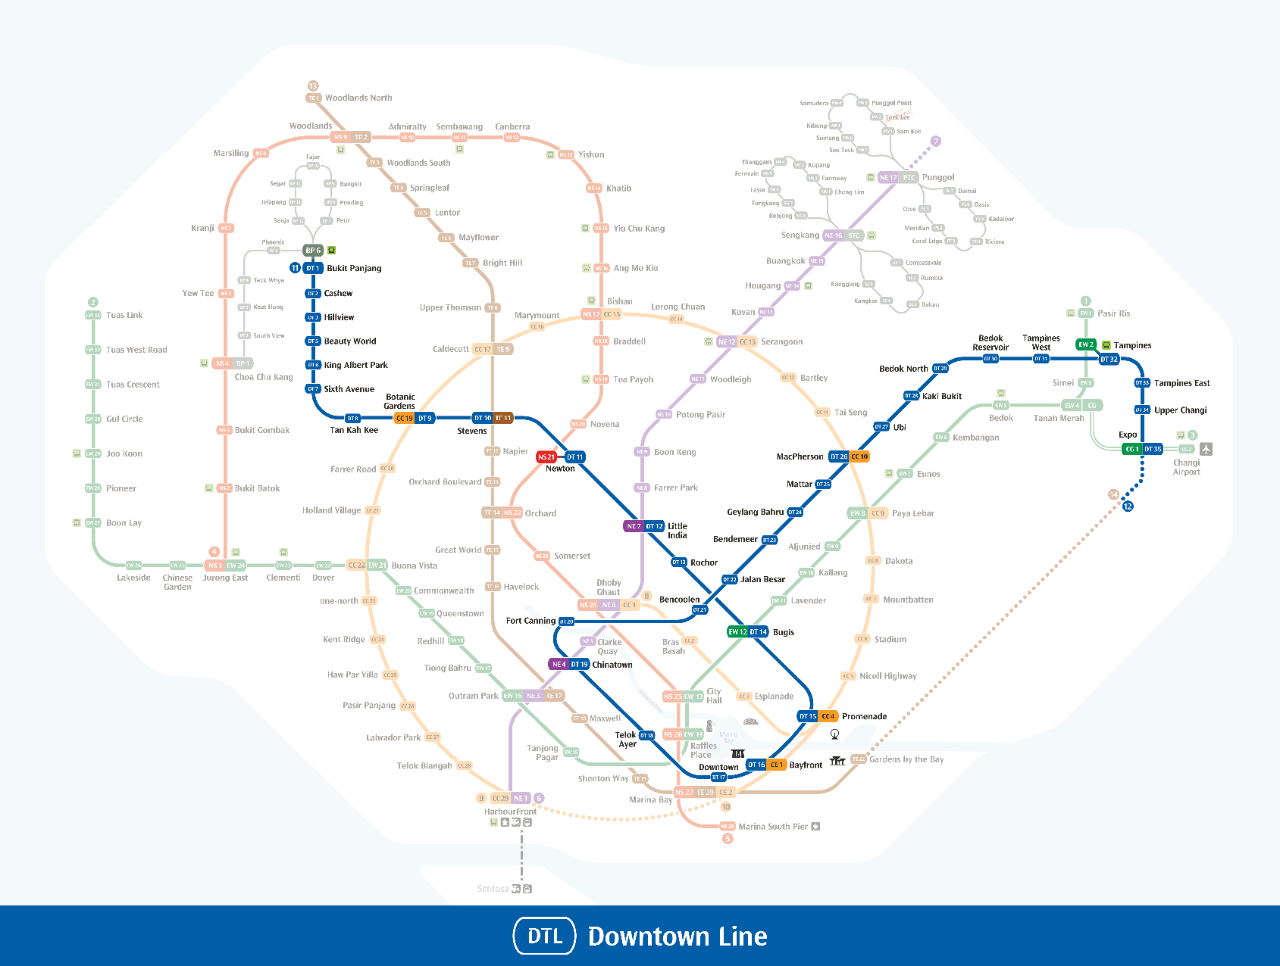 This is the system map for Downtown Line.